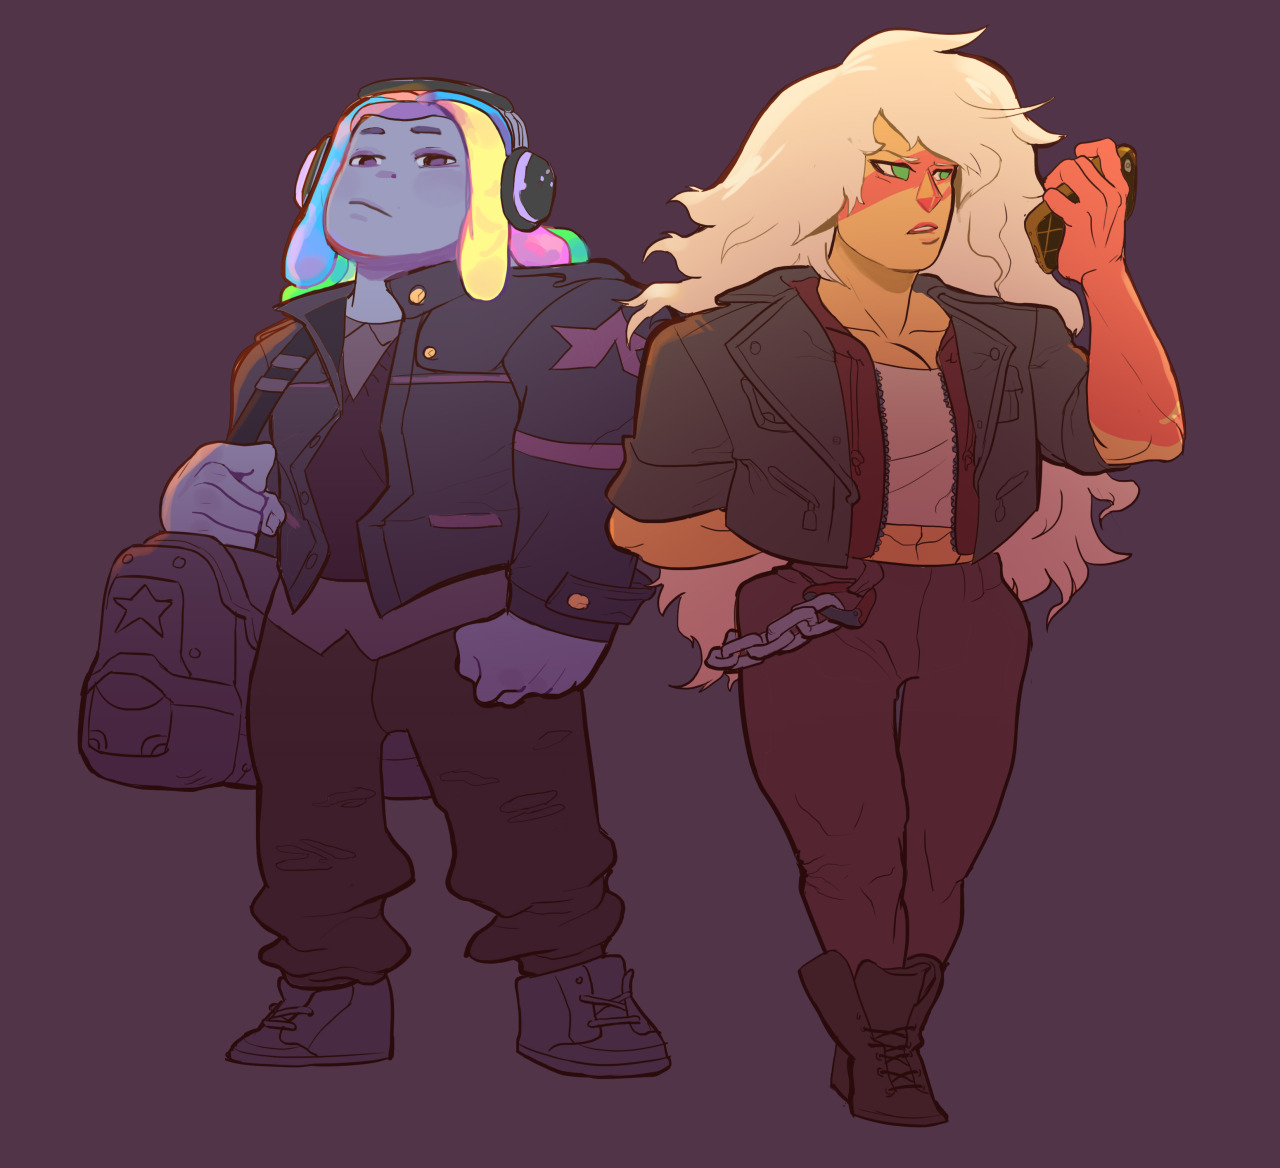 finally checked these two off my never ending list of characters I want to draw…